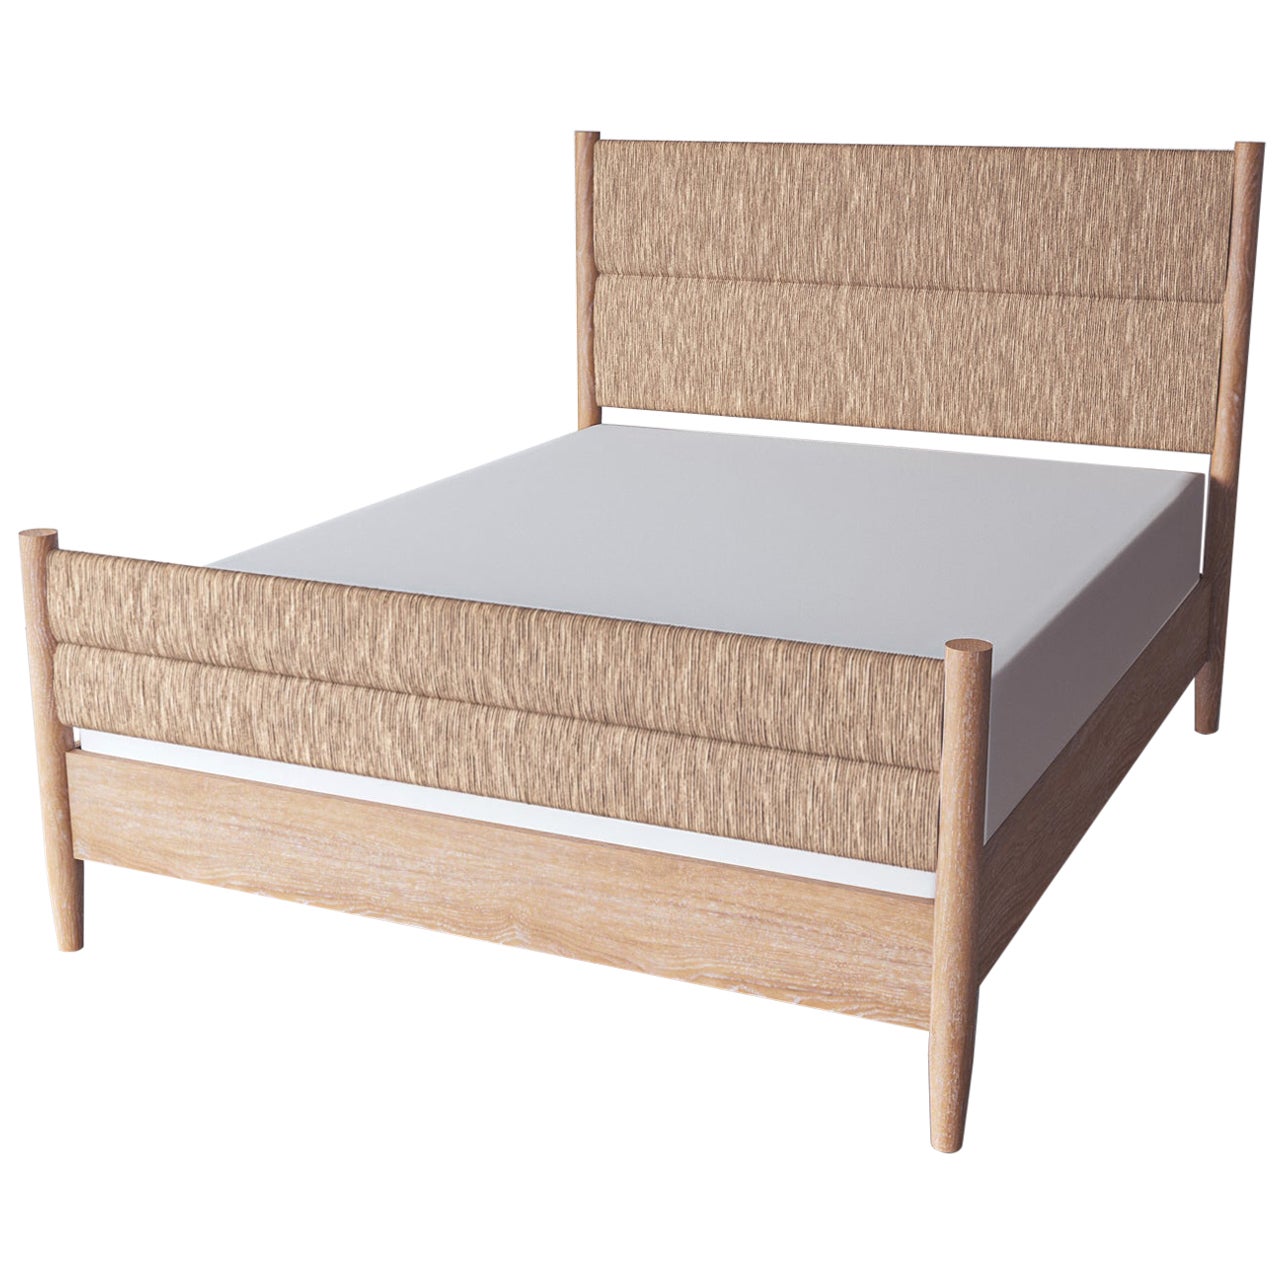 "Perronet" Rush Weave and French Oak Bed Frame 'Queen' by Christiane Lemieux For Sale